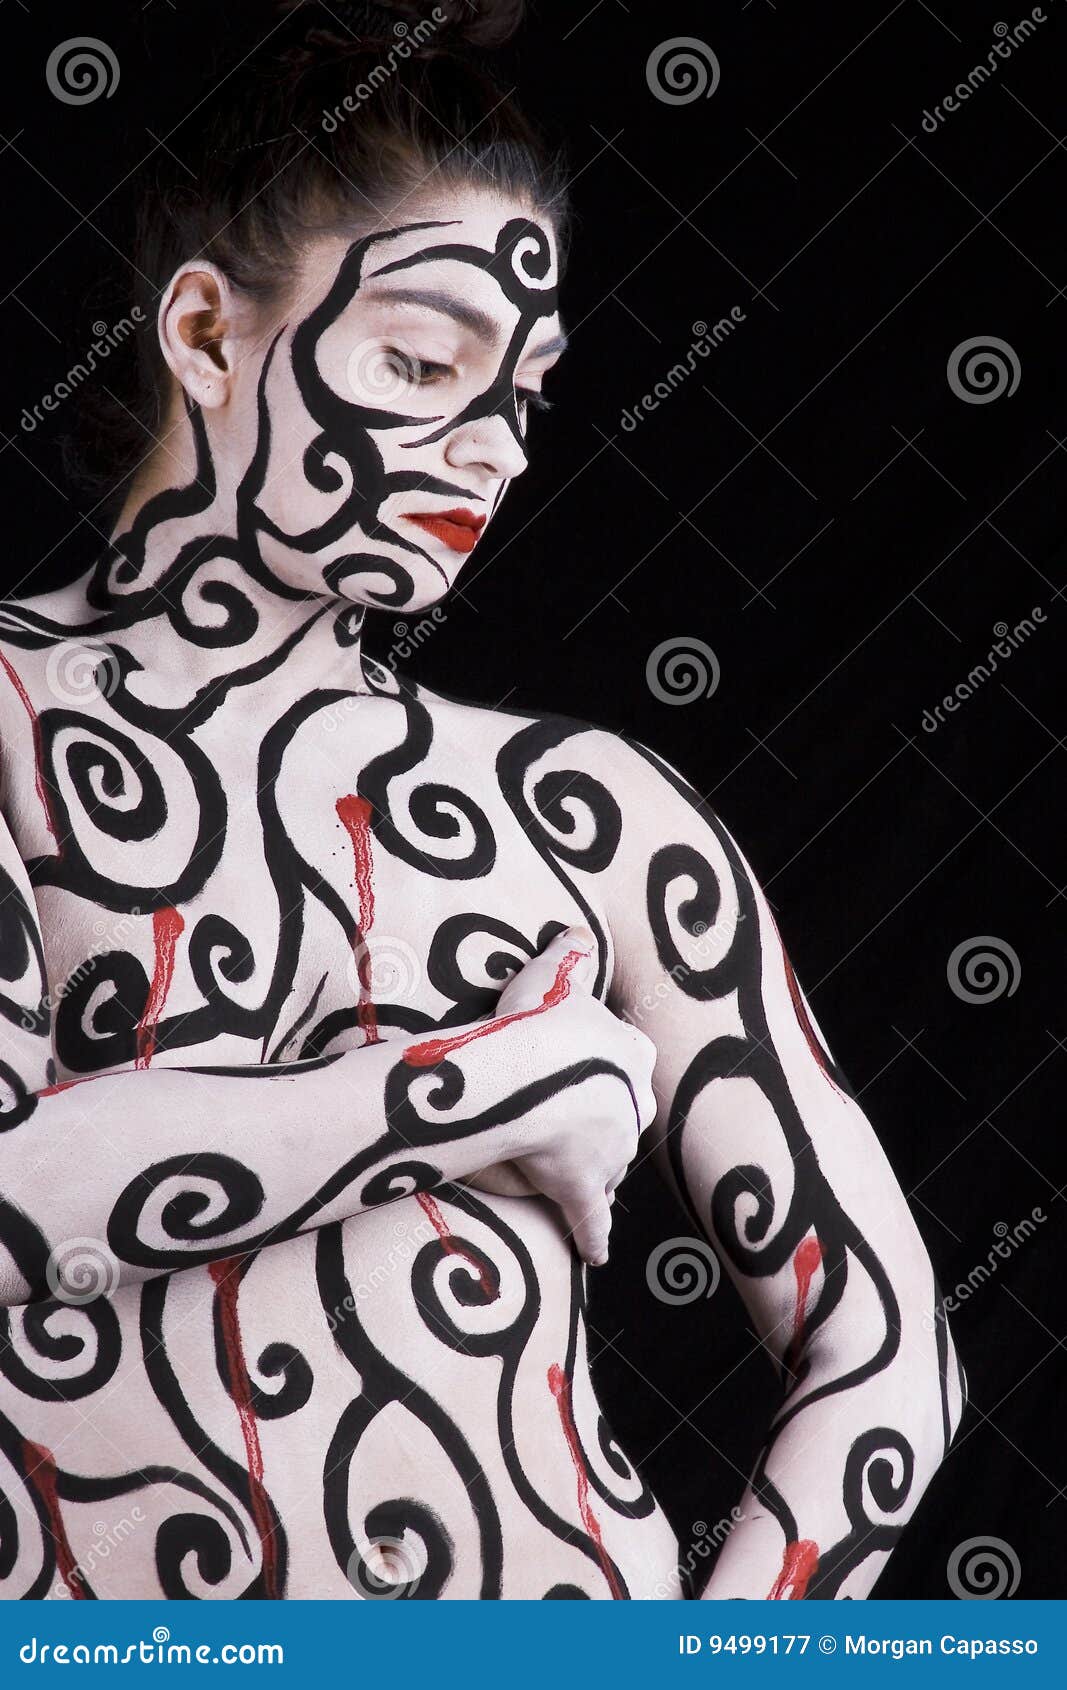 Abstract Body Painting Royalty Free Stock Photography